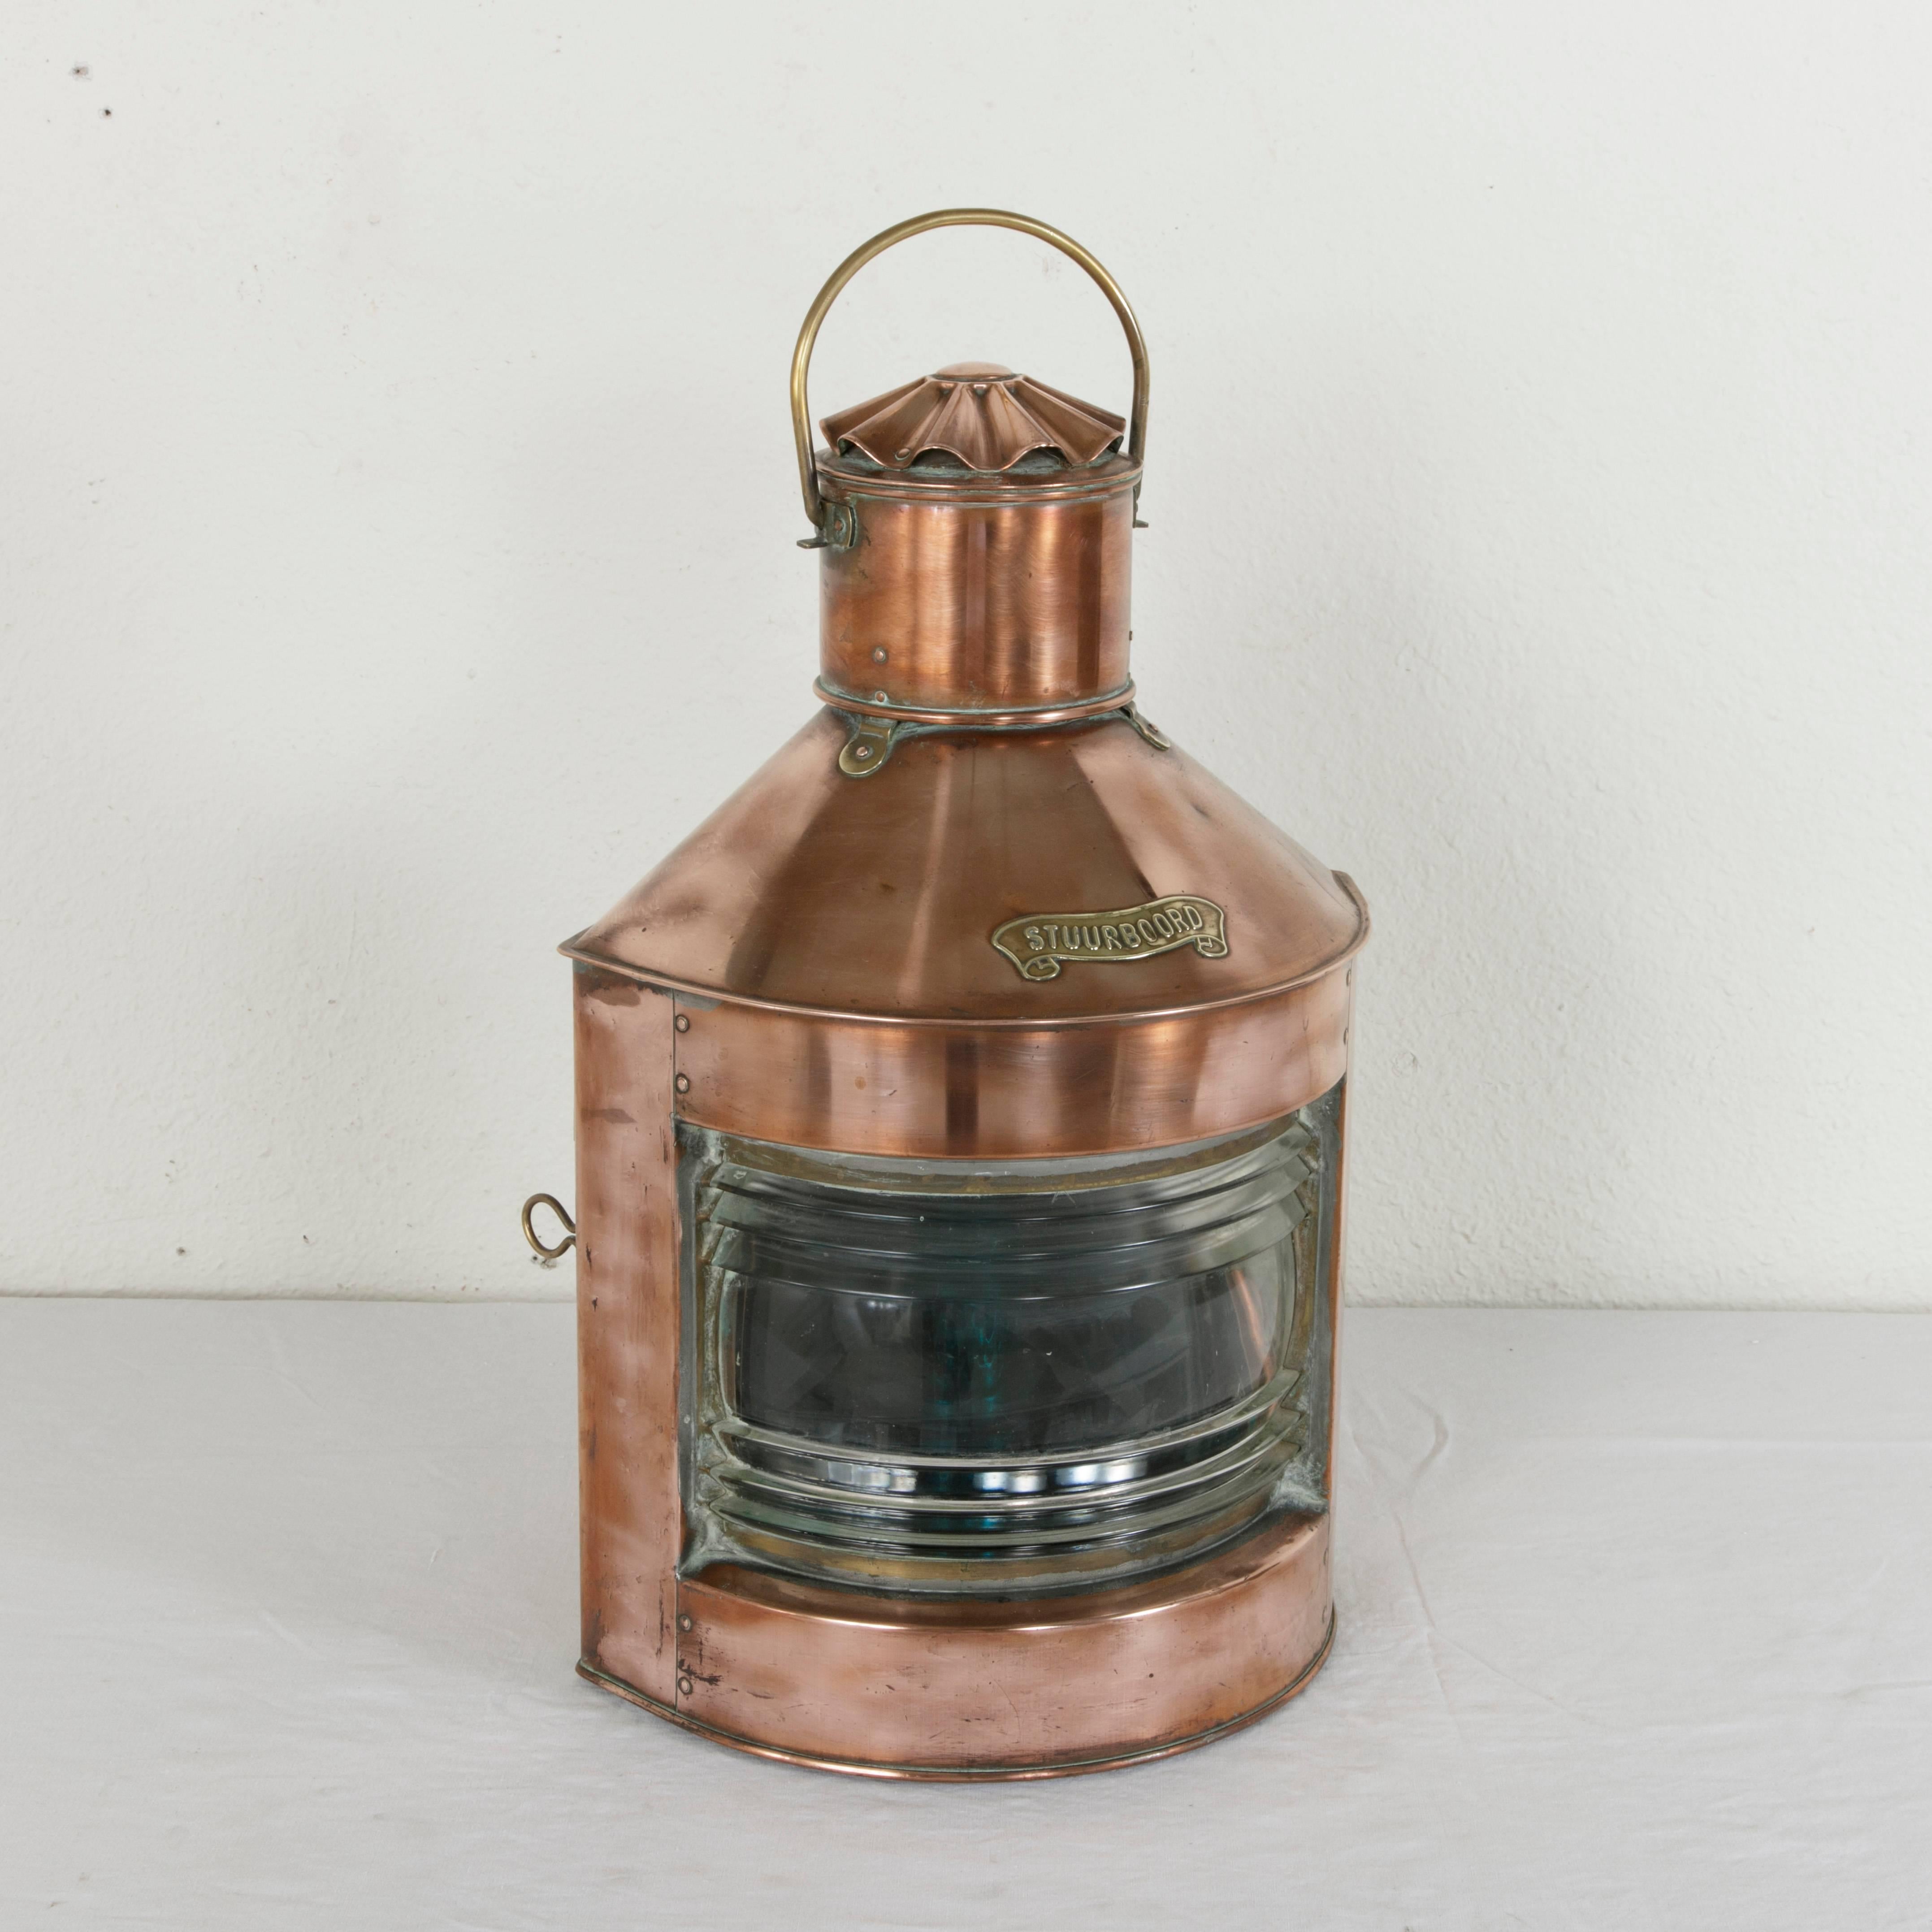 This large circa 1900 Dutch copper nautical lantern features a brass label in the form of a scroll marked Stuurboord or starboard in Dutch. A latch at the back allows it to be opened and reveals an interior with the original glass hurricane lamp and